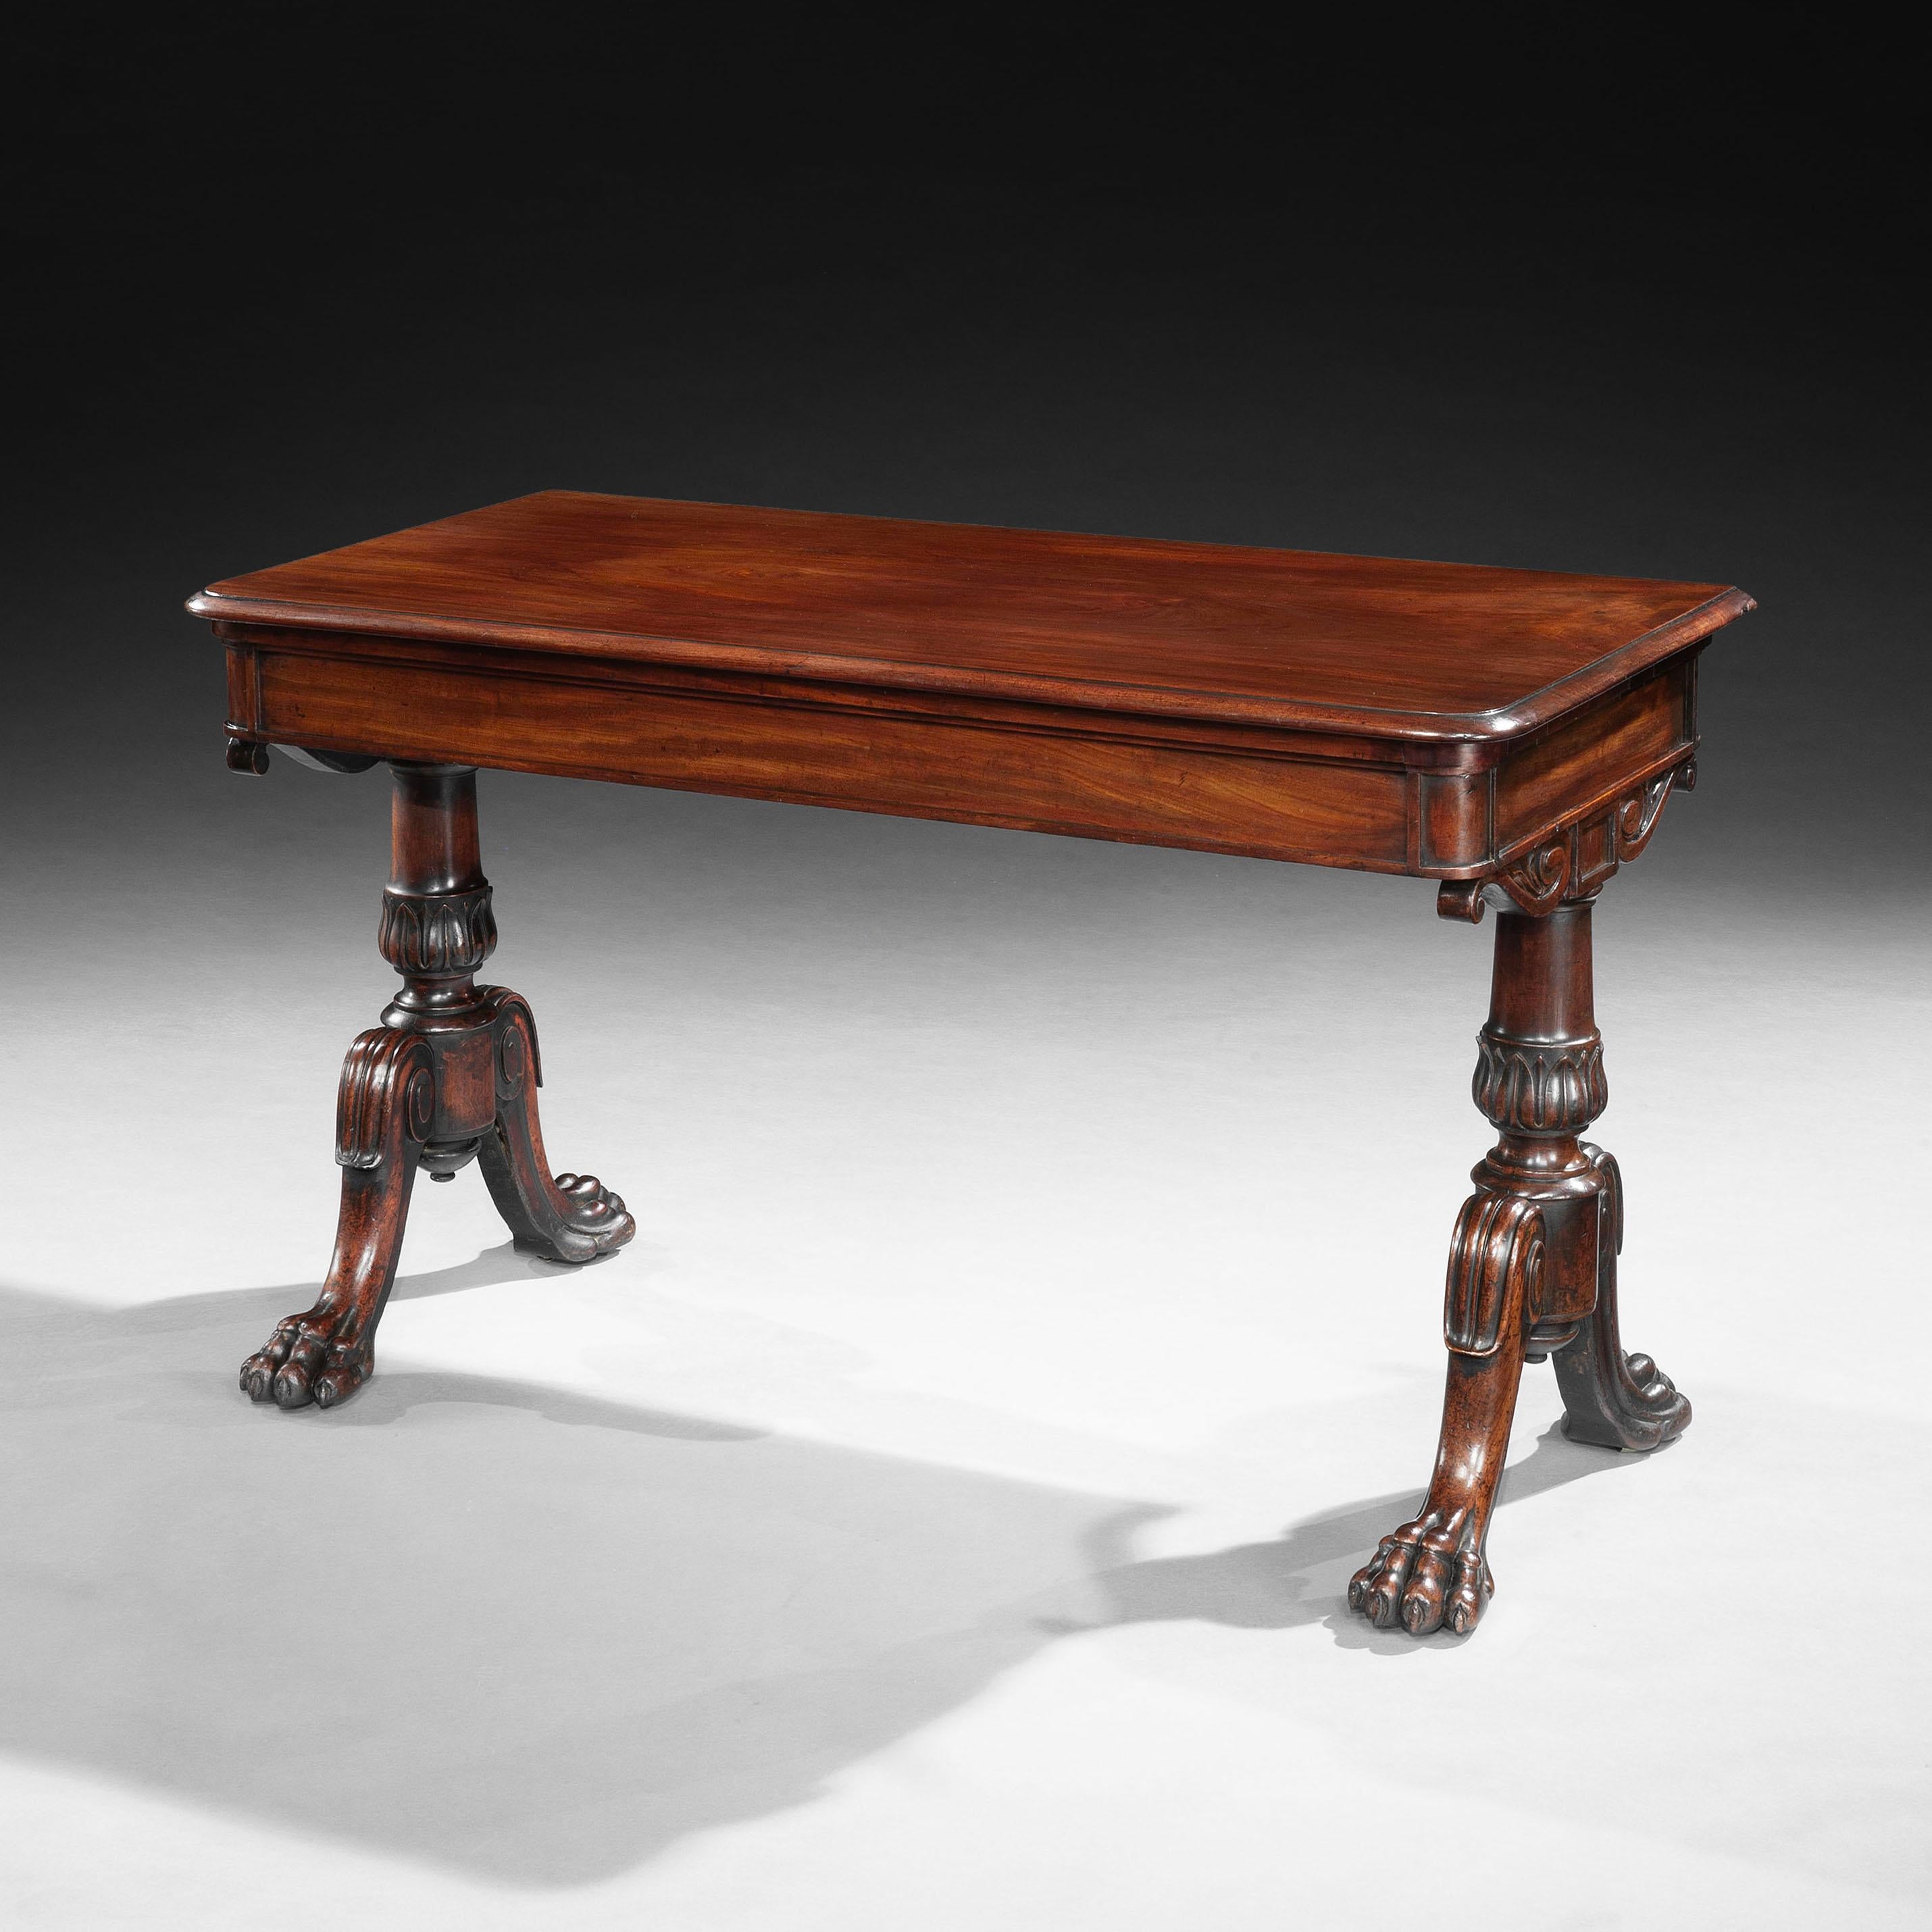 Rare 19th Century English Mahogany Extending Dining Table by Wilkinson & Sons For Sale 1